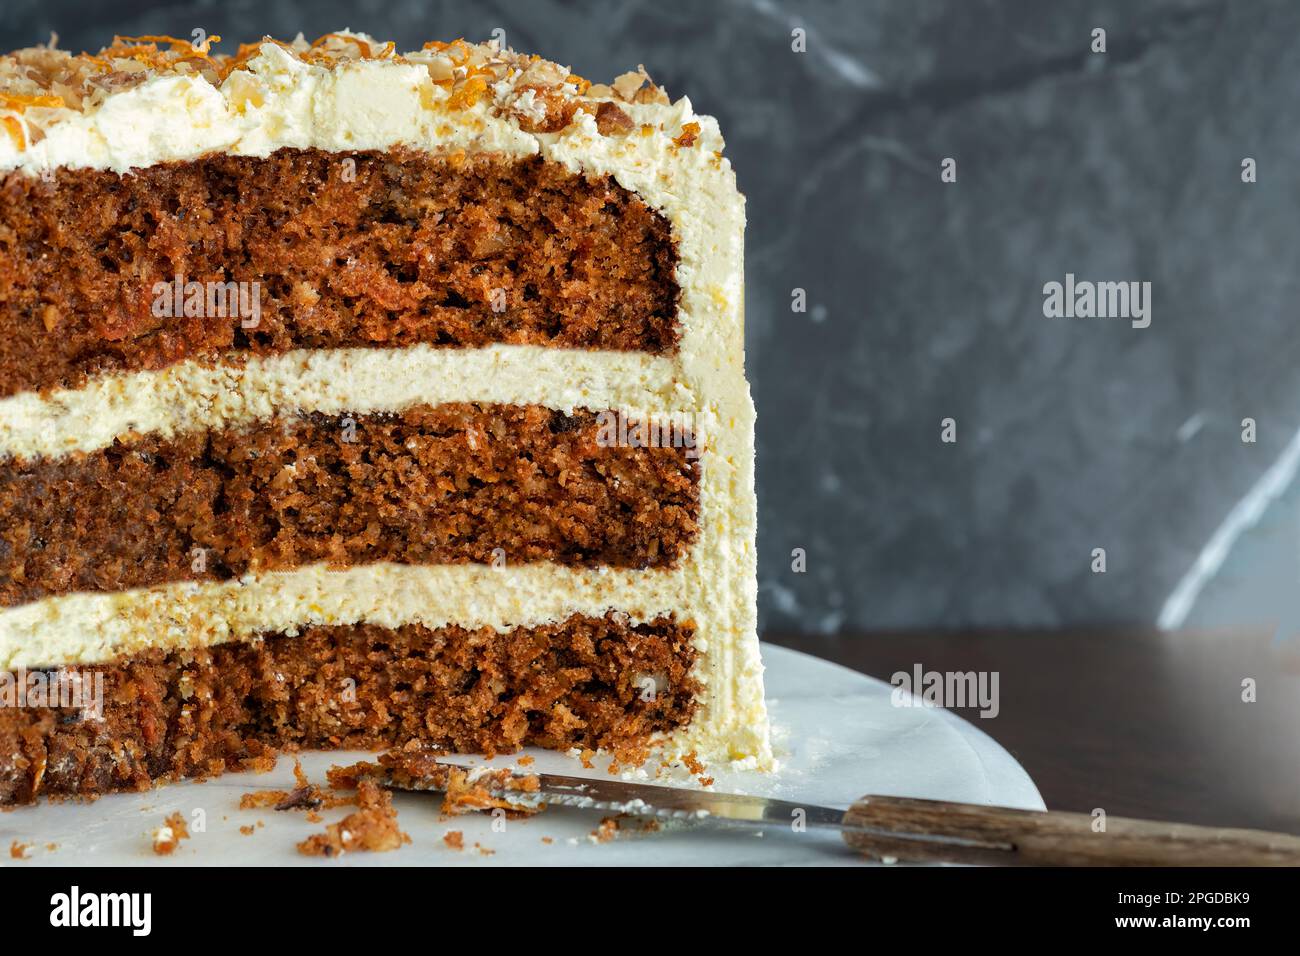 A three tiered traditional home baked carrot cake. The cake has a cream cheese frosting decorated with walnuts. The cake is cut showing the crumb Stock Photo